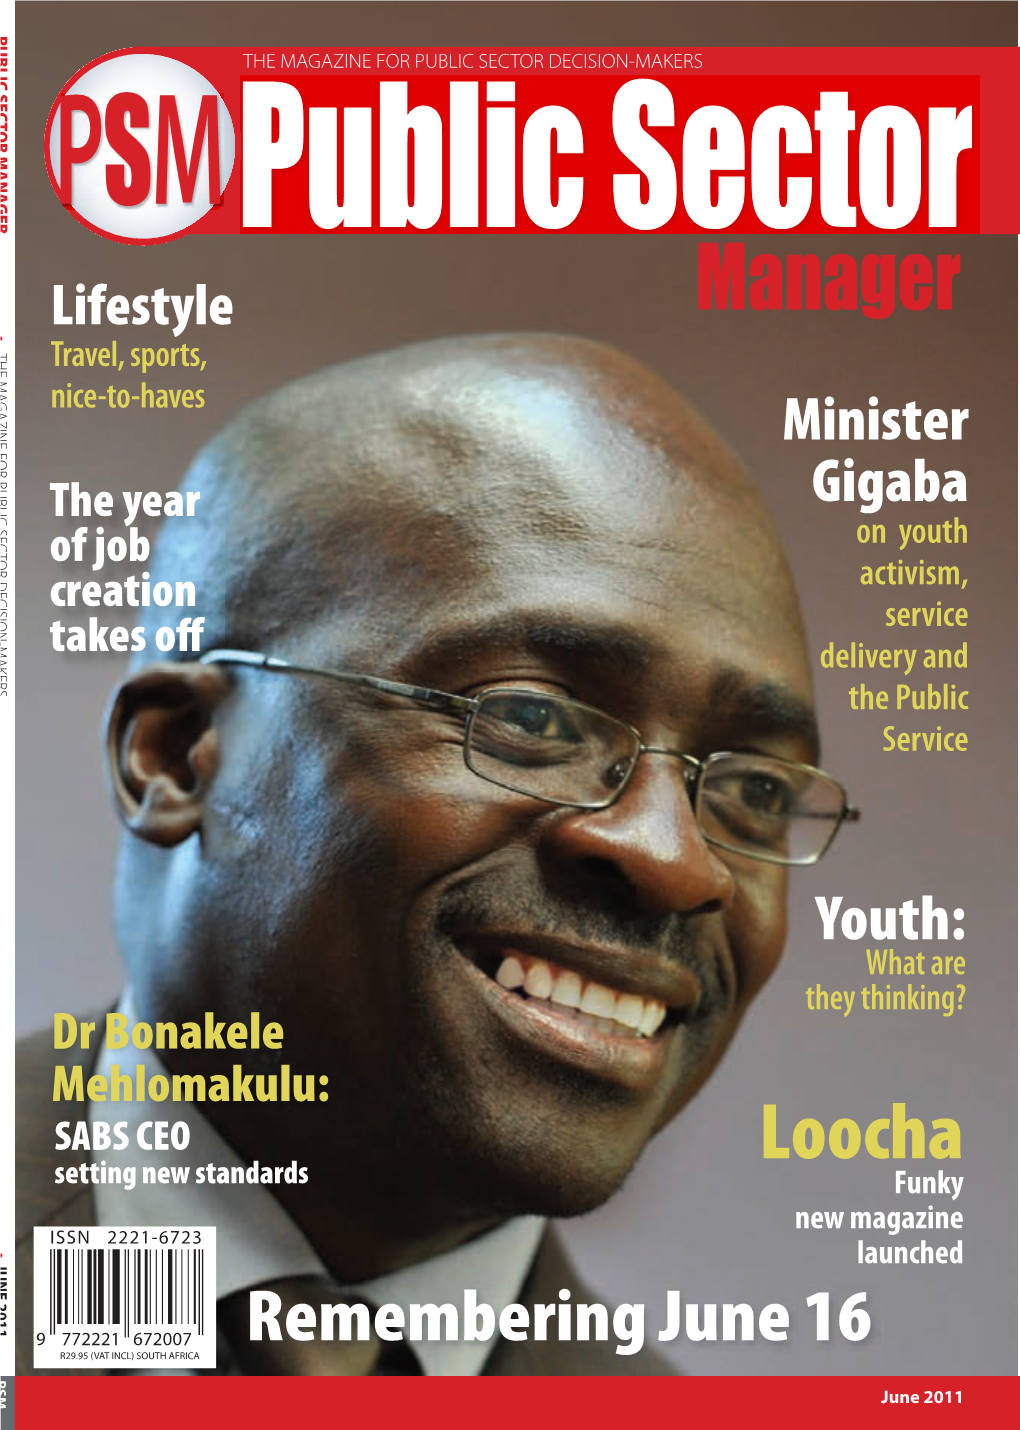 Public Sector Manager the MAGAZINE for PUBLIC SECTOR DECISION-MAKERS